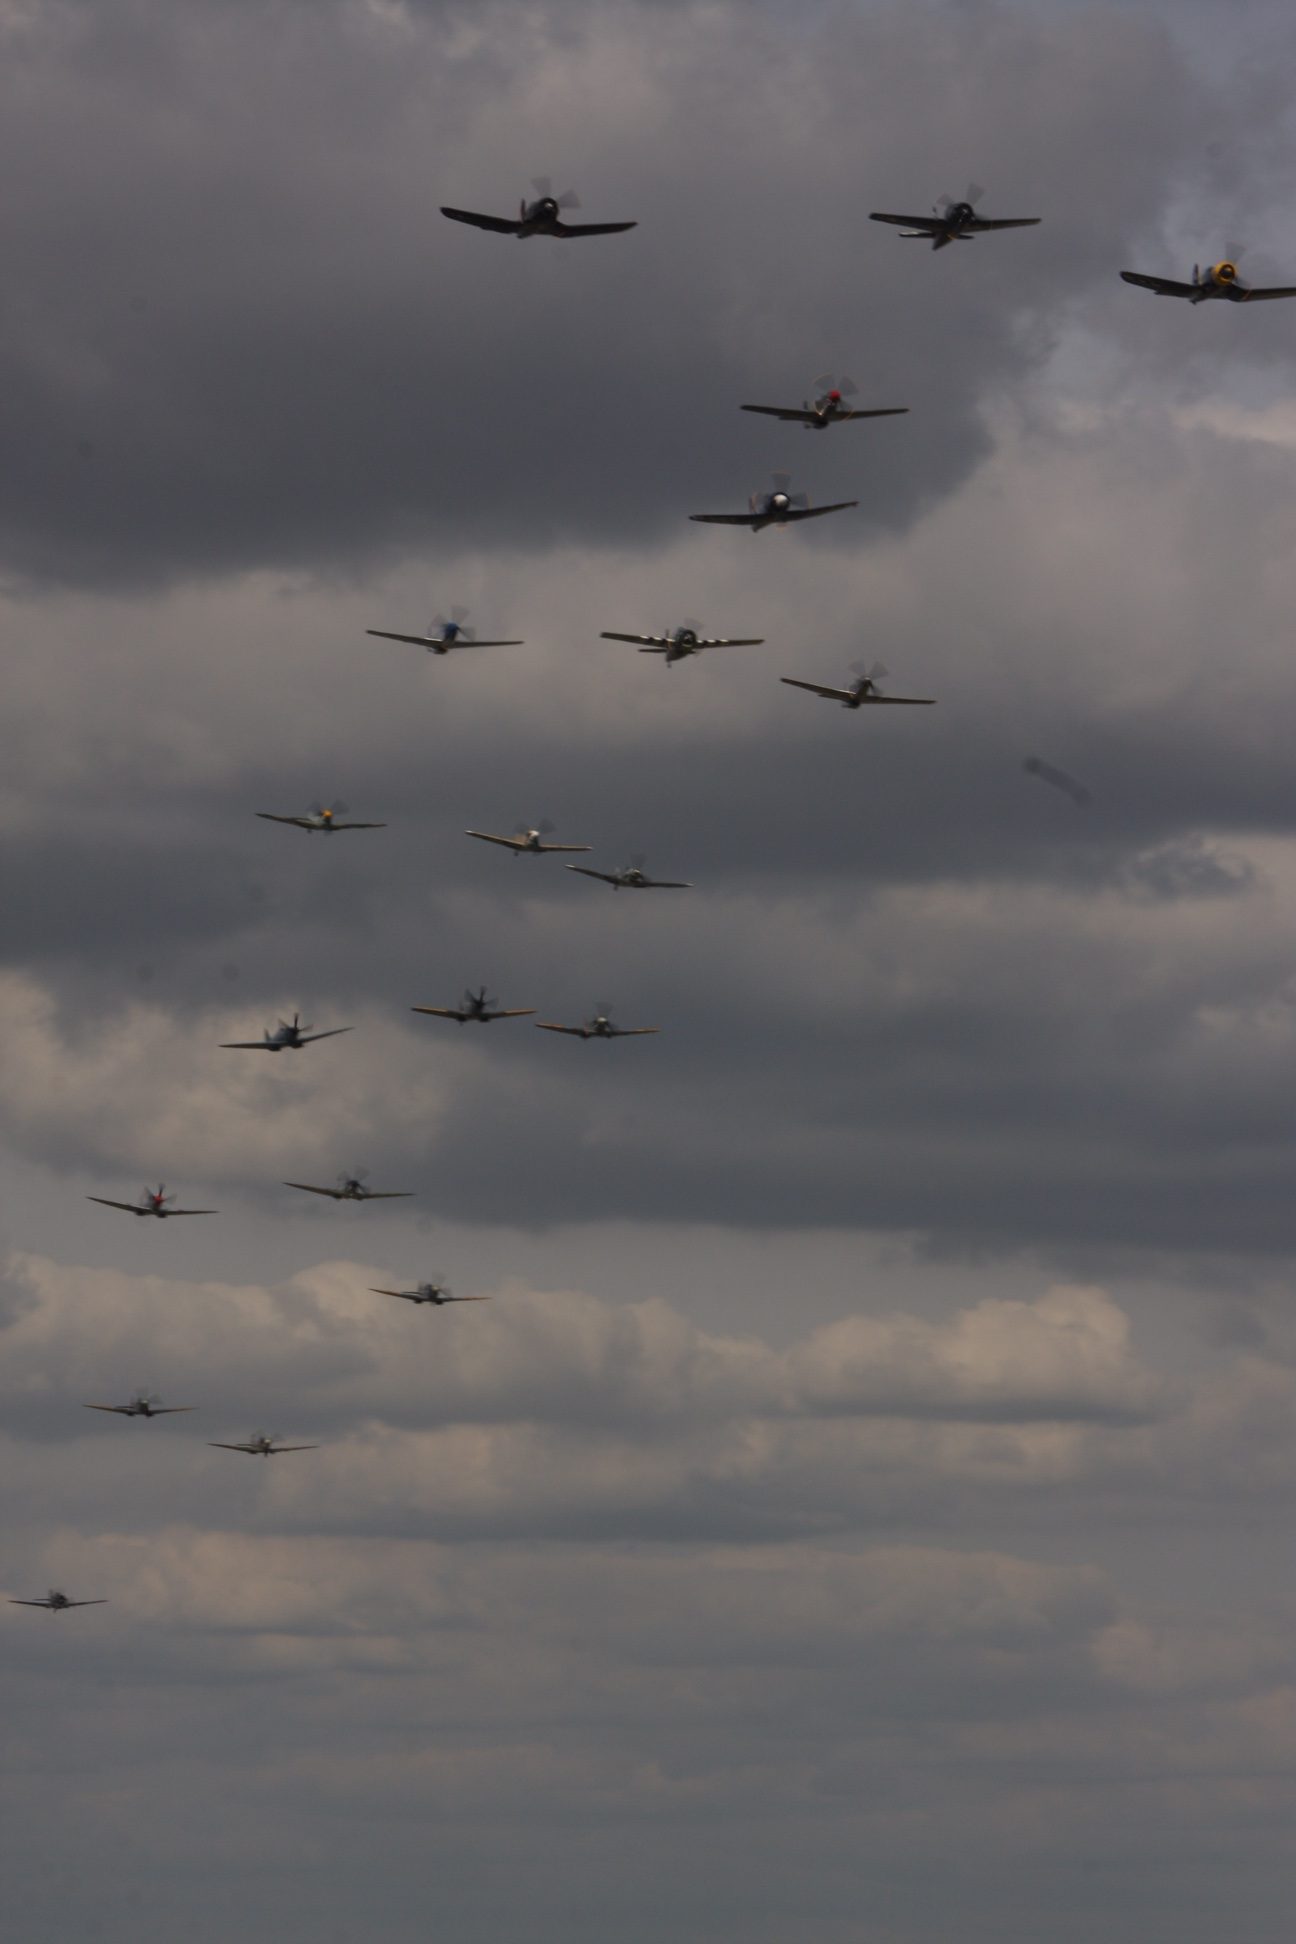 Flying Legends Duxford. The final Balbo (a flypast of all the planes at the show) over thirty WW11 aircraft. What a sight and sound.